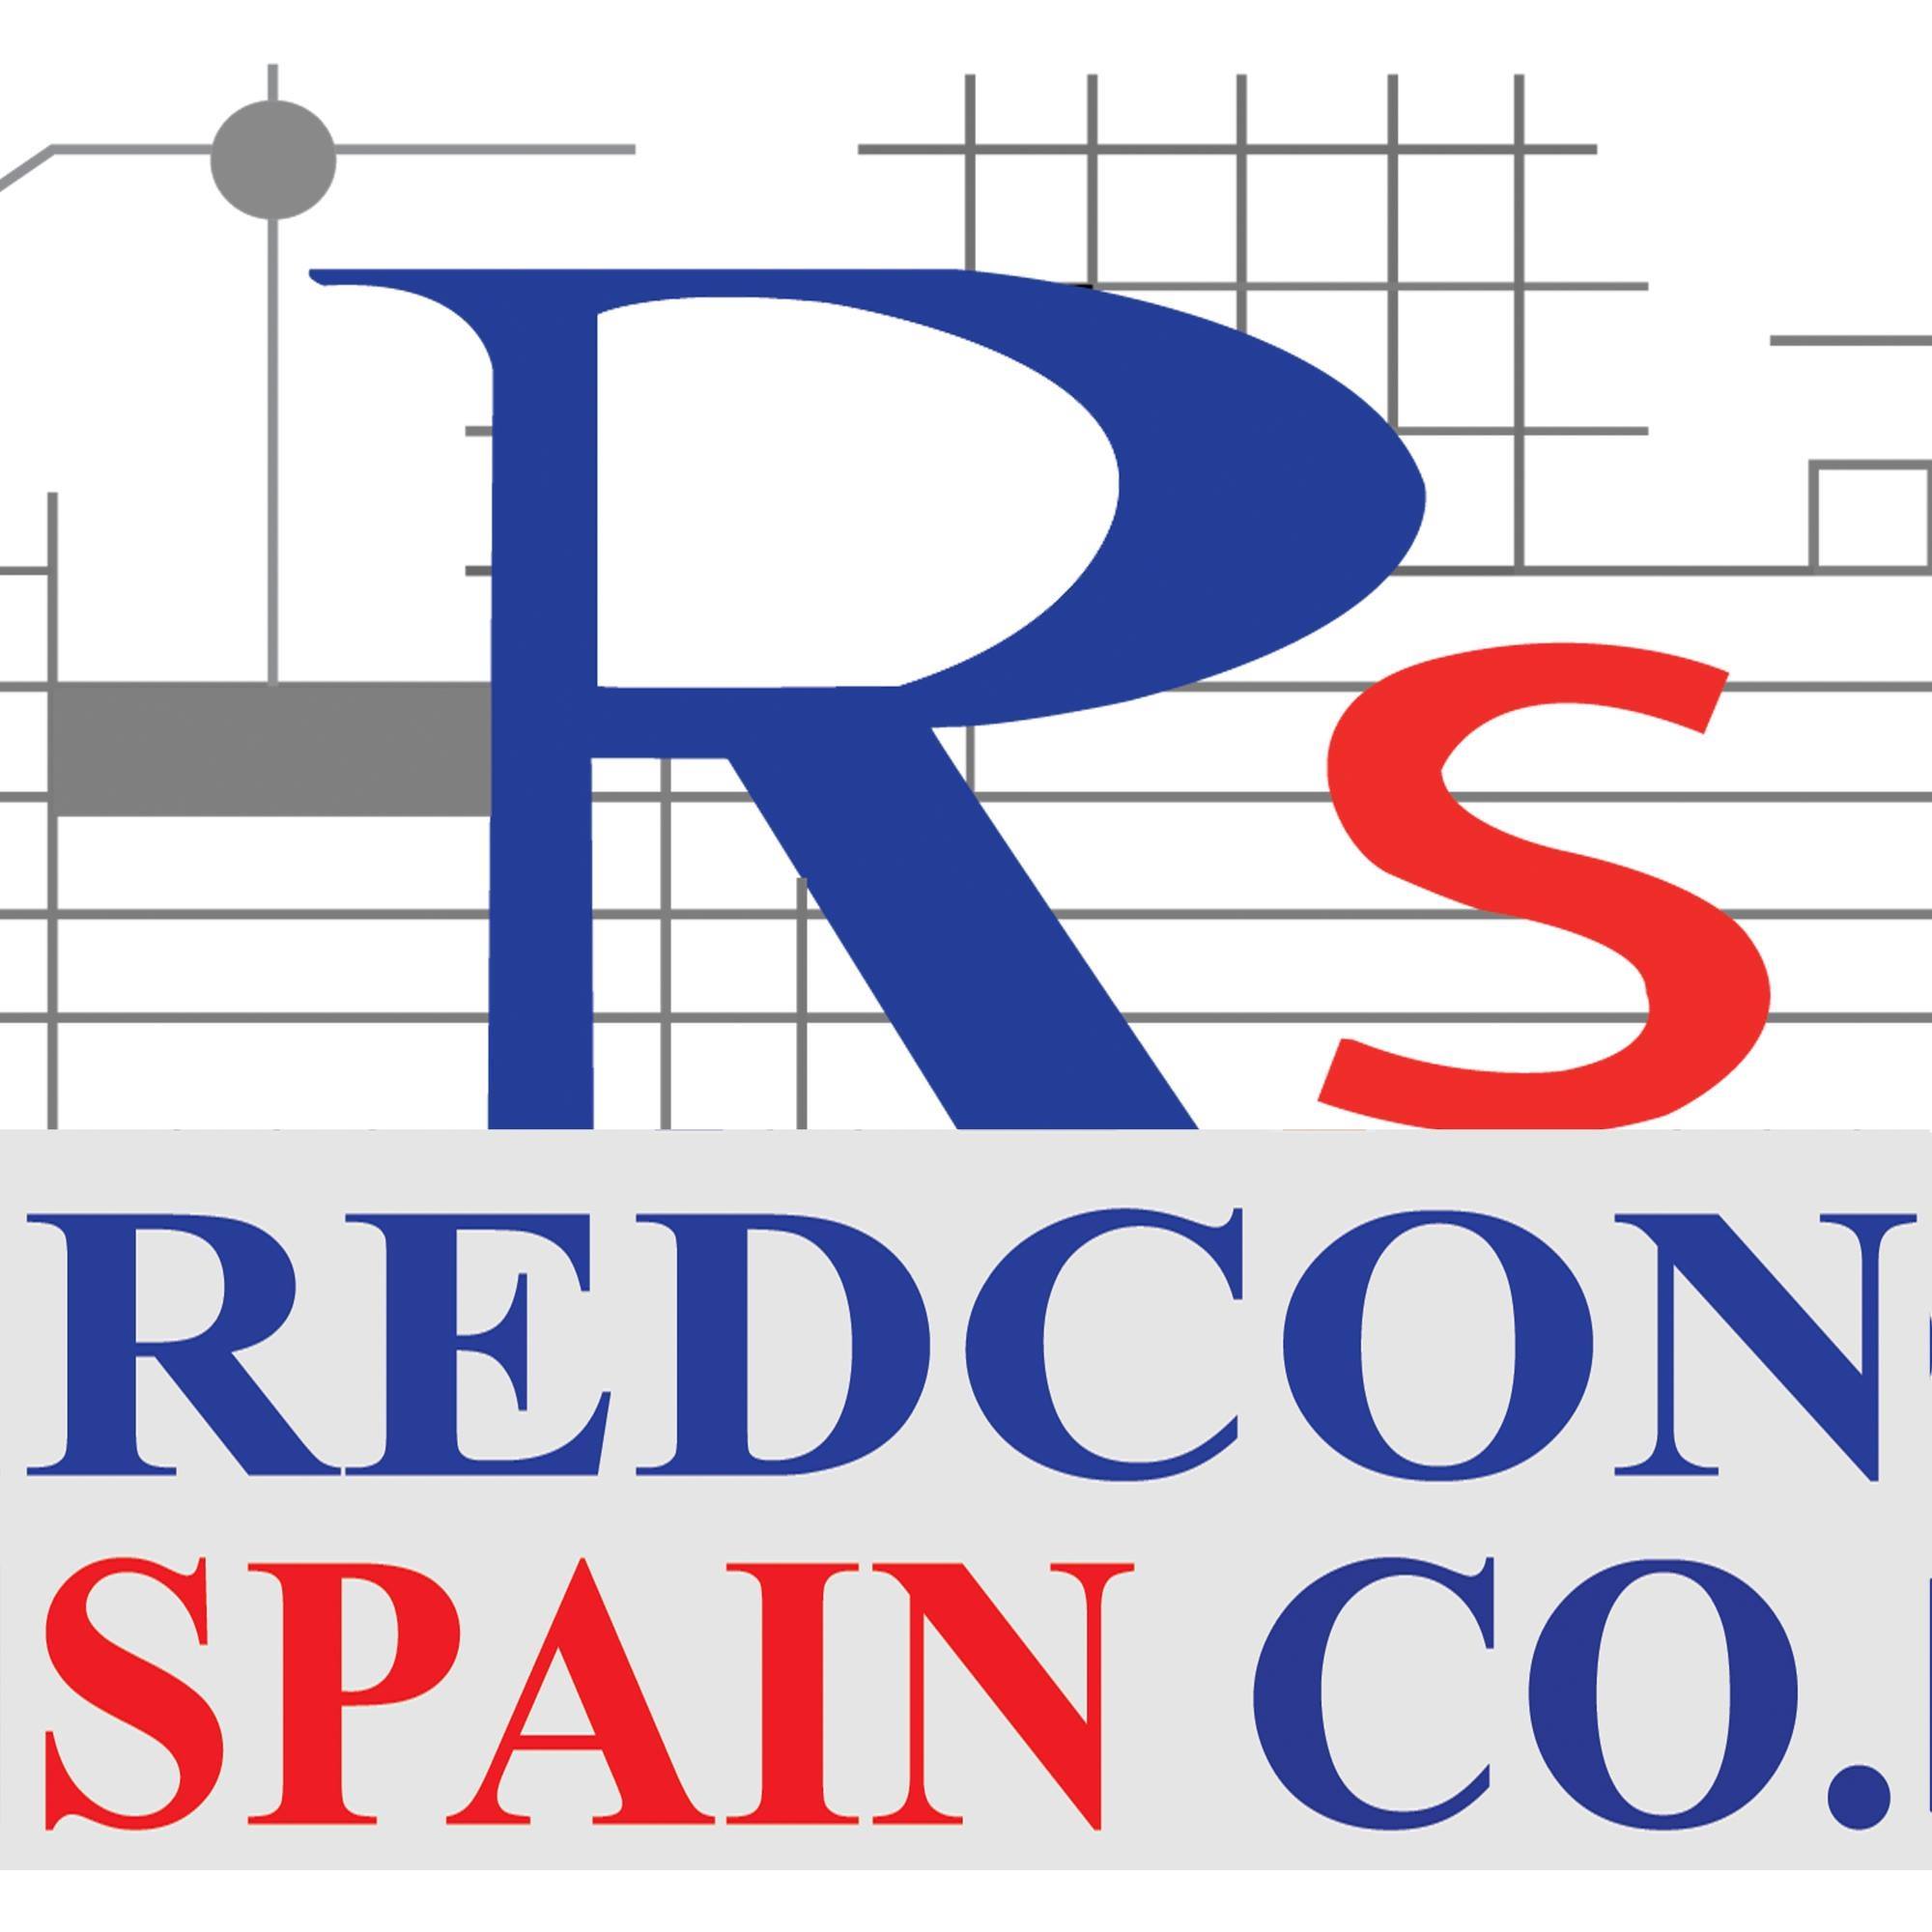 Redcon Spain for construction